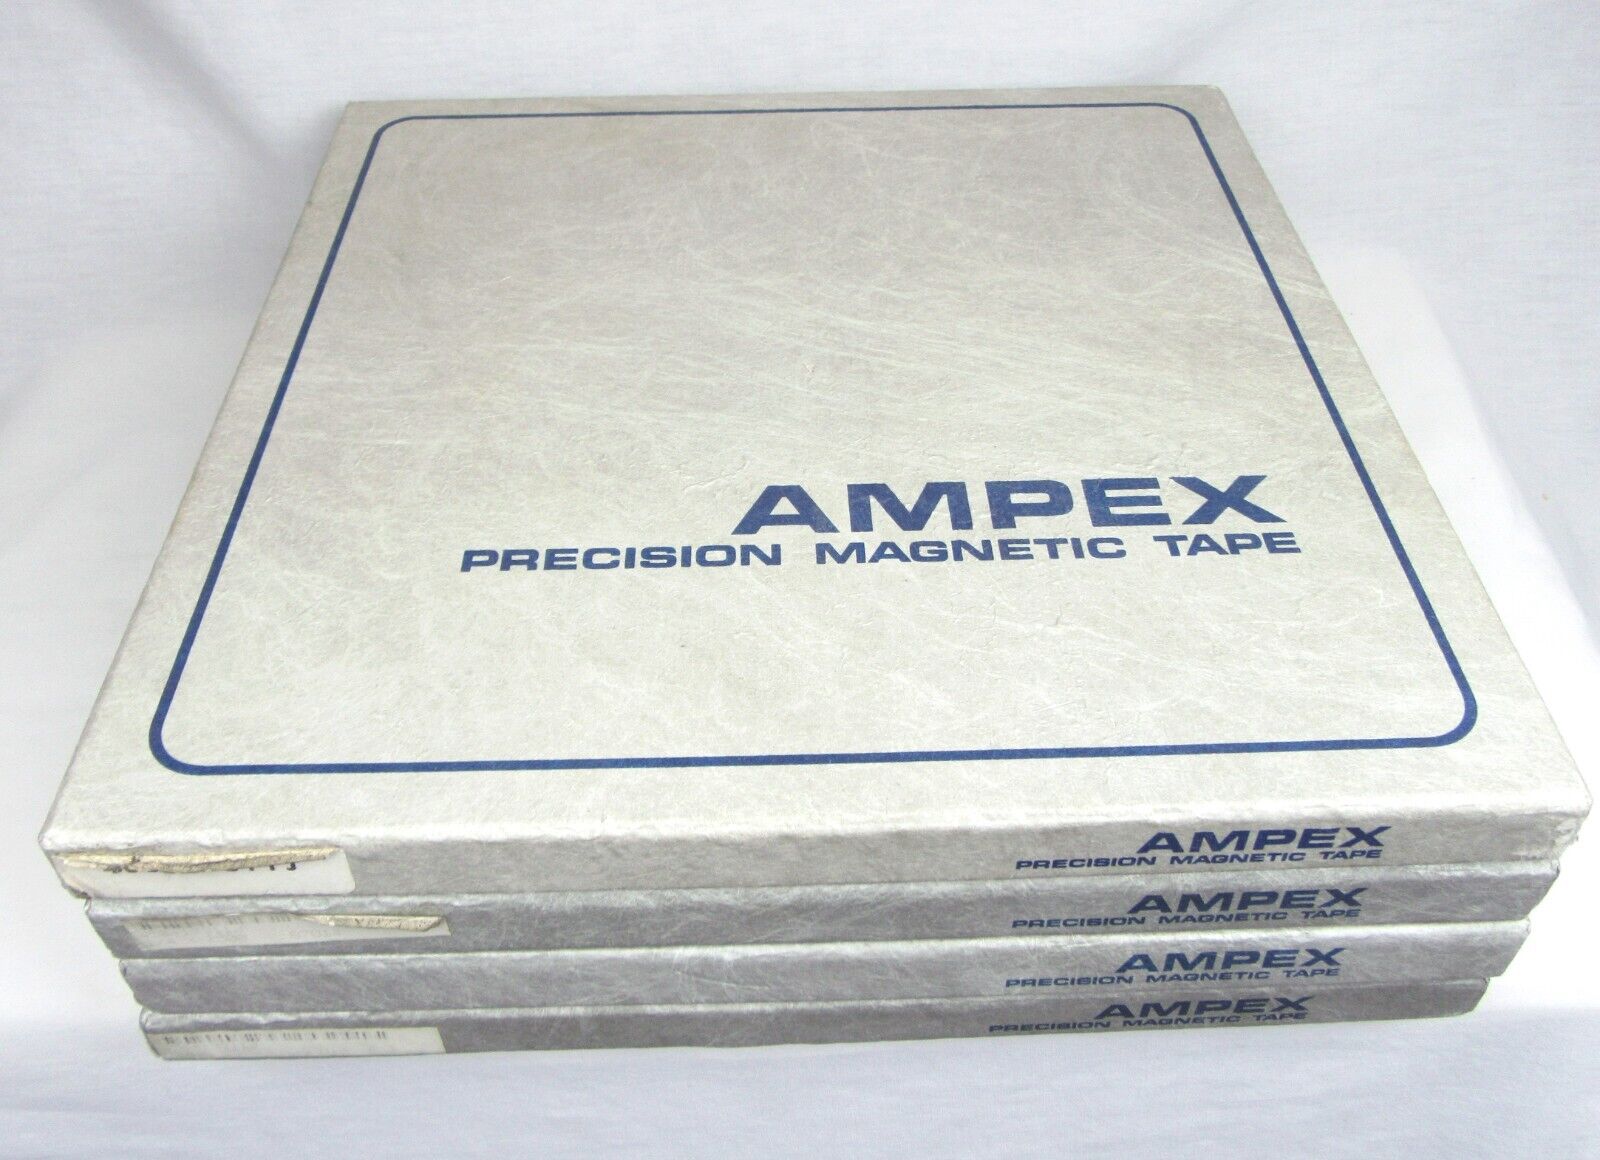 Ampex Full Flange Reels with Boxes, 1/4 x 10.5, Set of 4 - Used, 